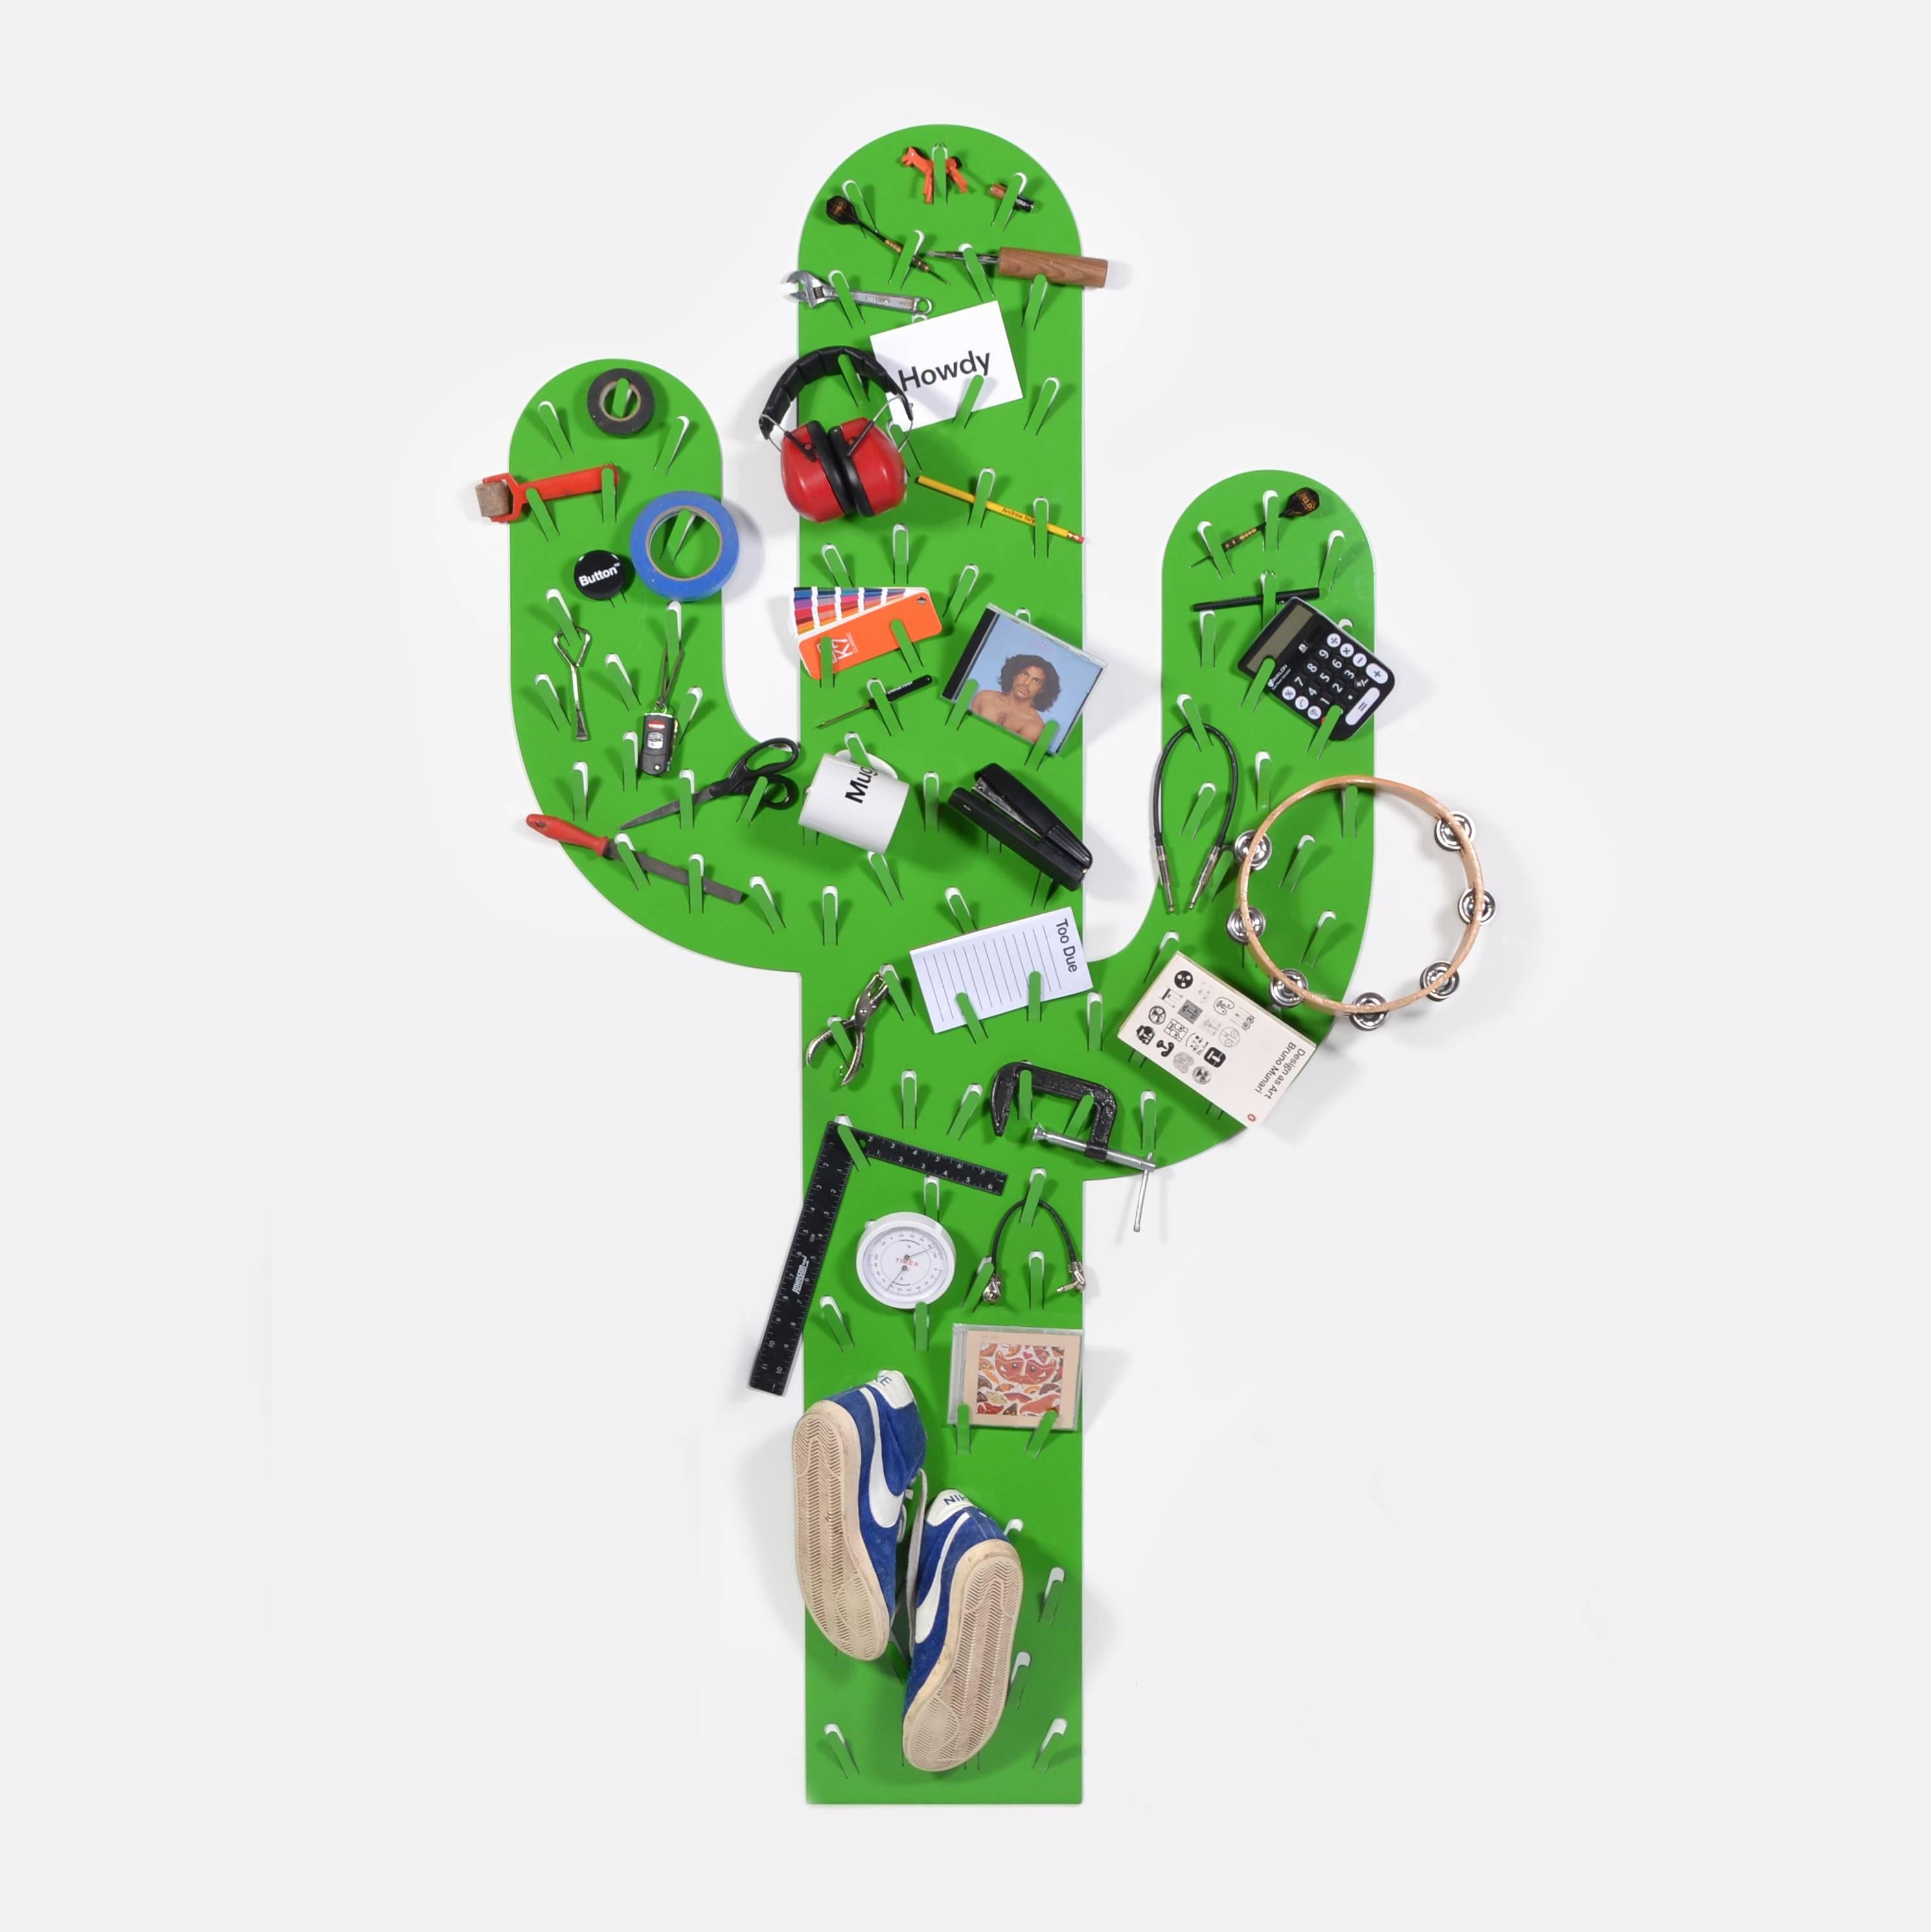 American Cactus Catchall by Andrew Neyer in Powder Coated Steel, USA, 2017